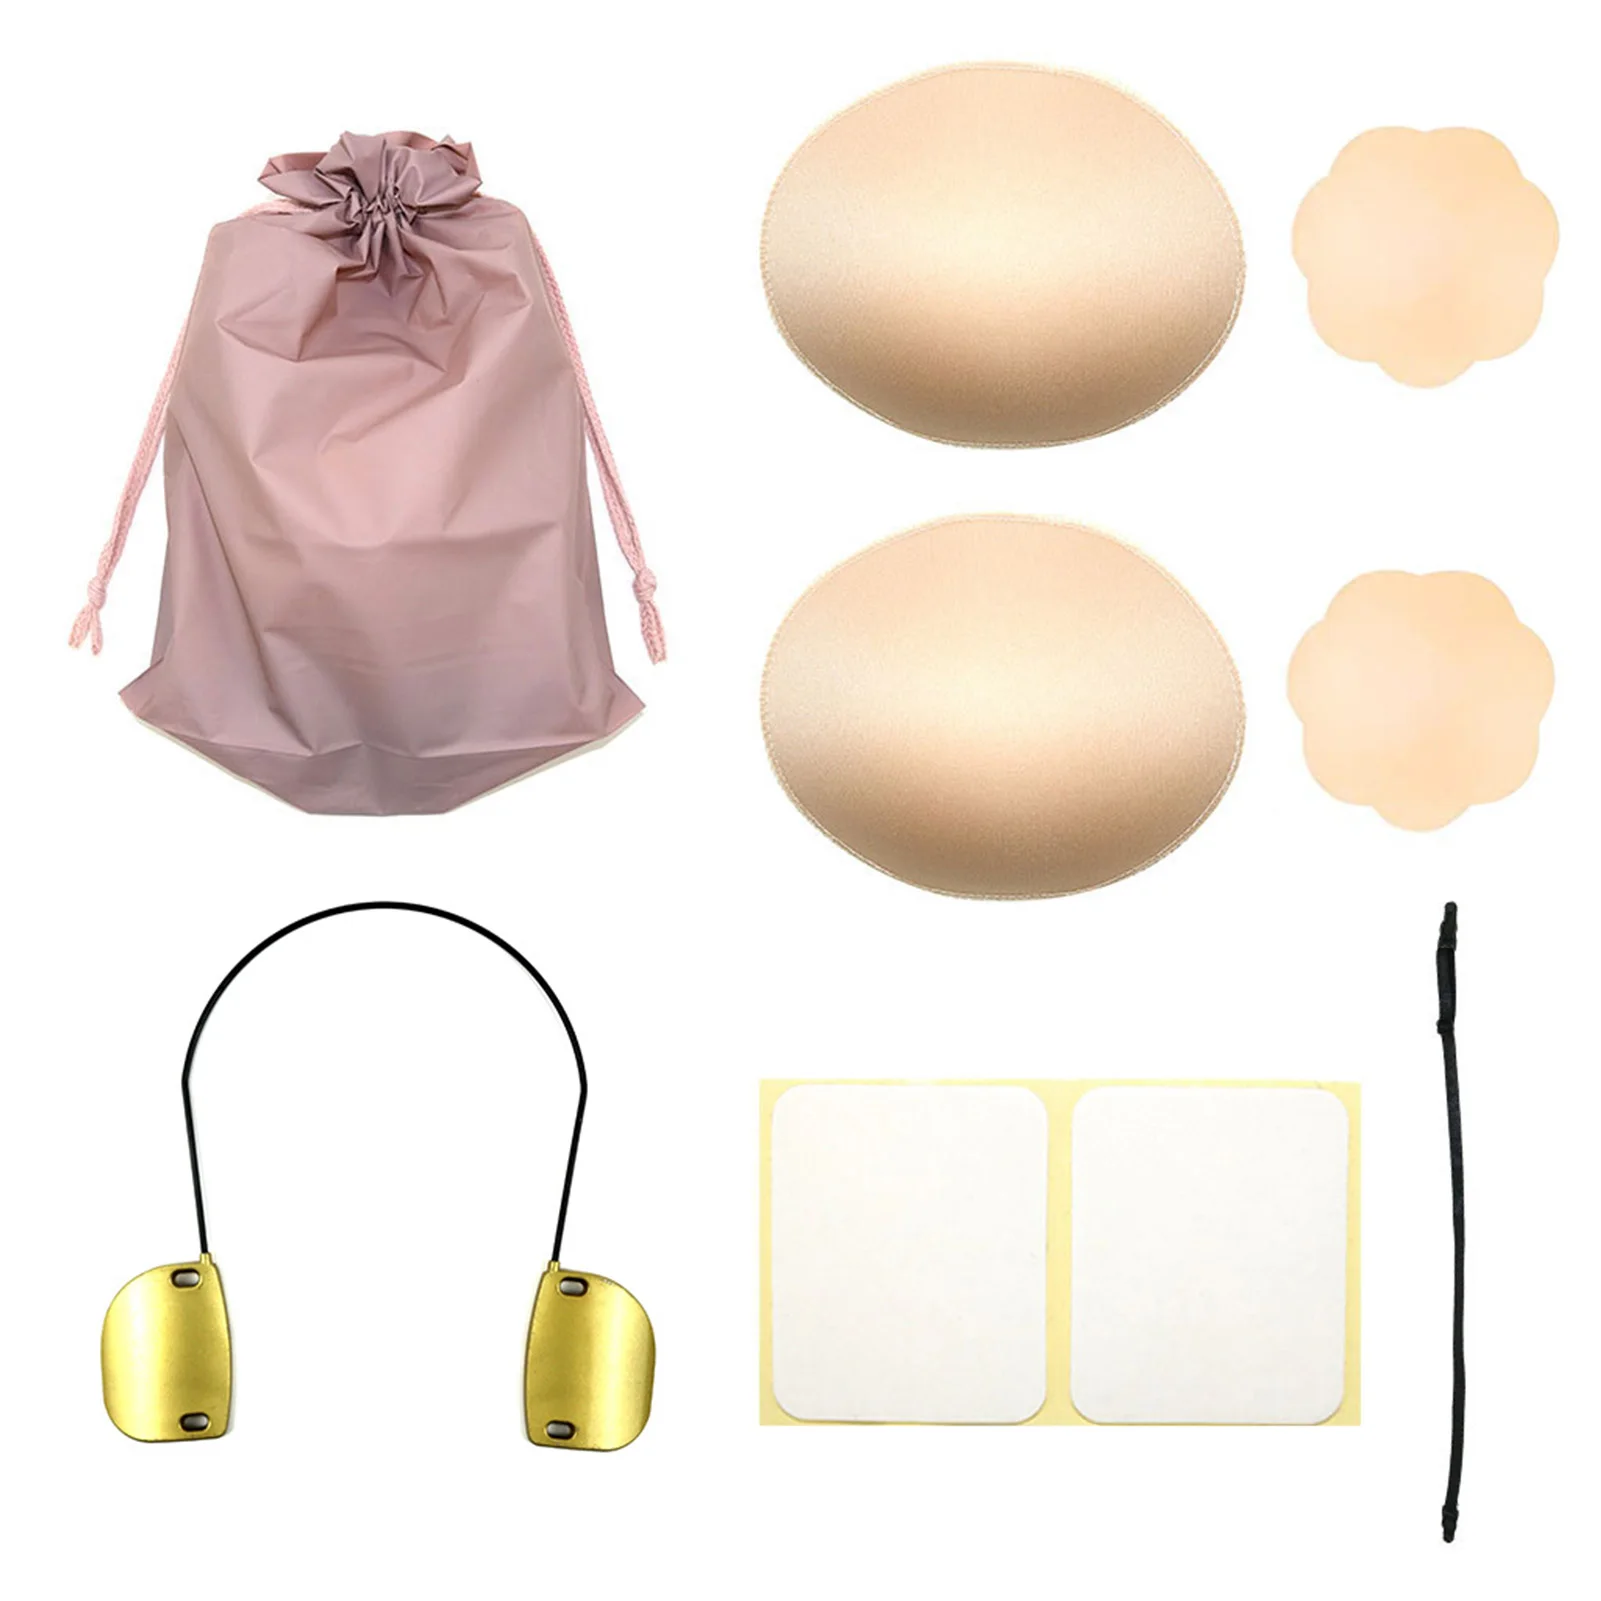 Push Up Strapless Bra Adhesive Plunge Bra Strapless Sticky Invisible Frontless Bra for Backless Wedding Dress Deep V Gowns